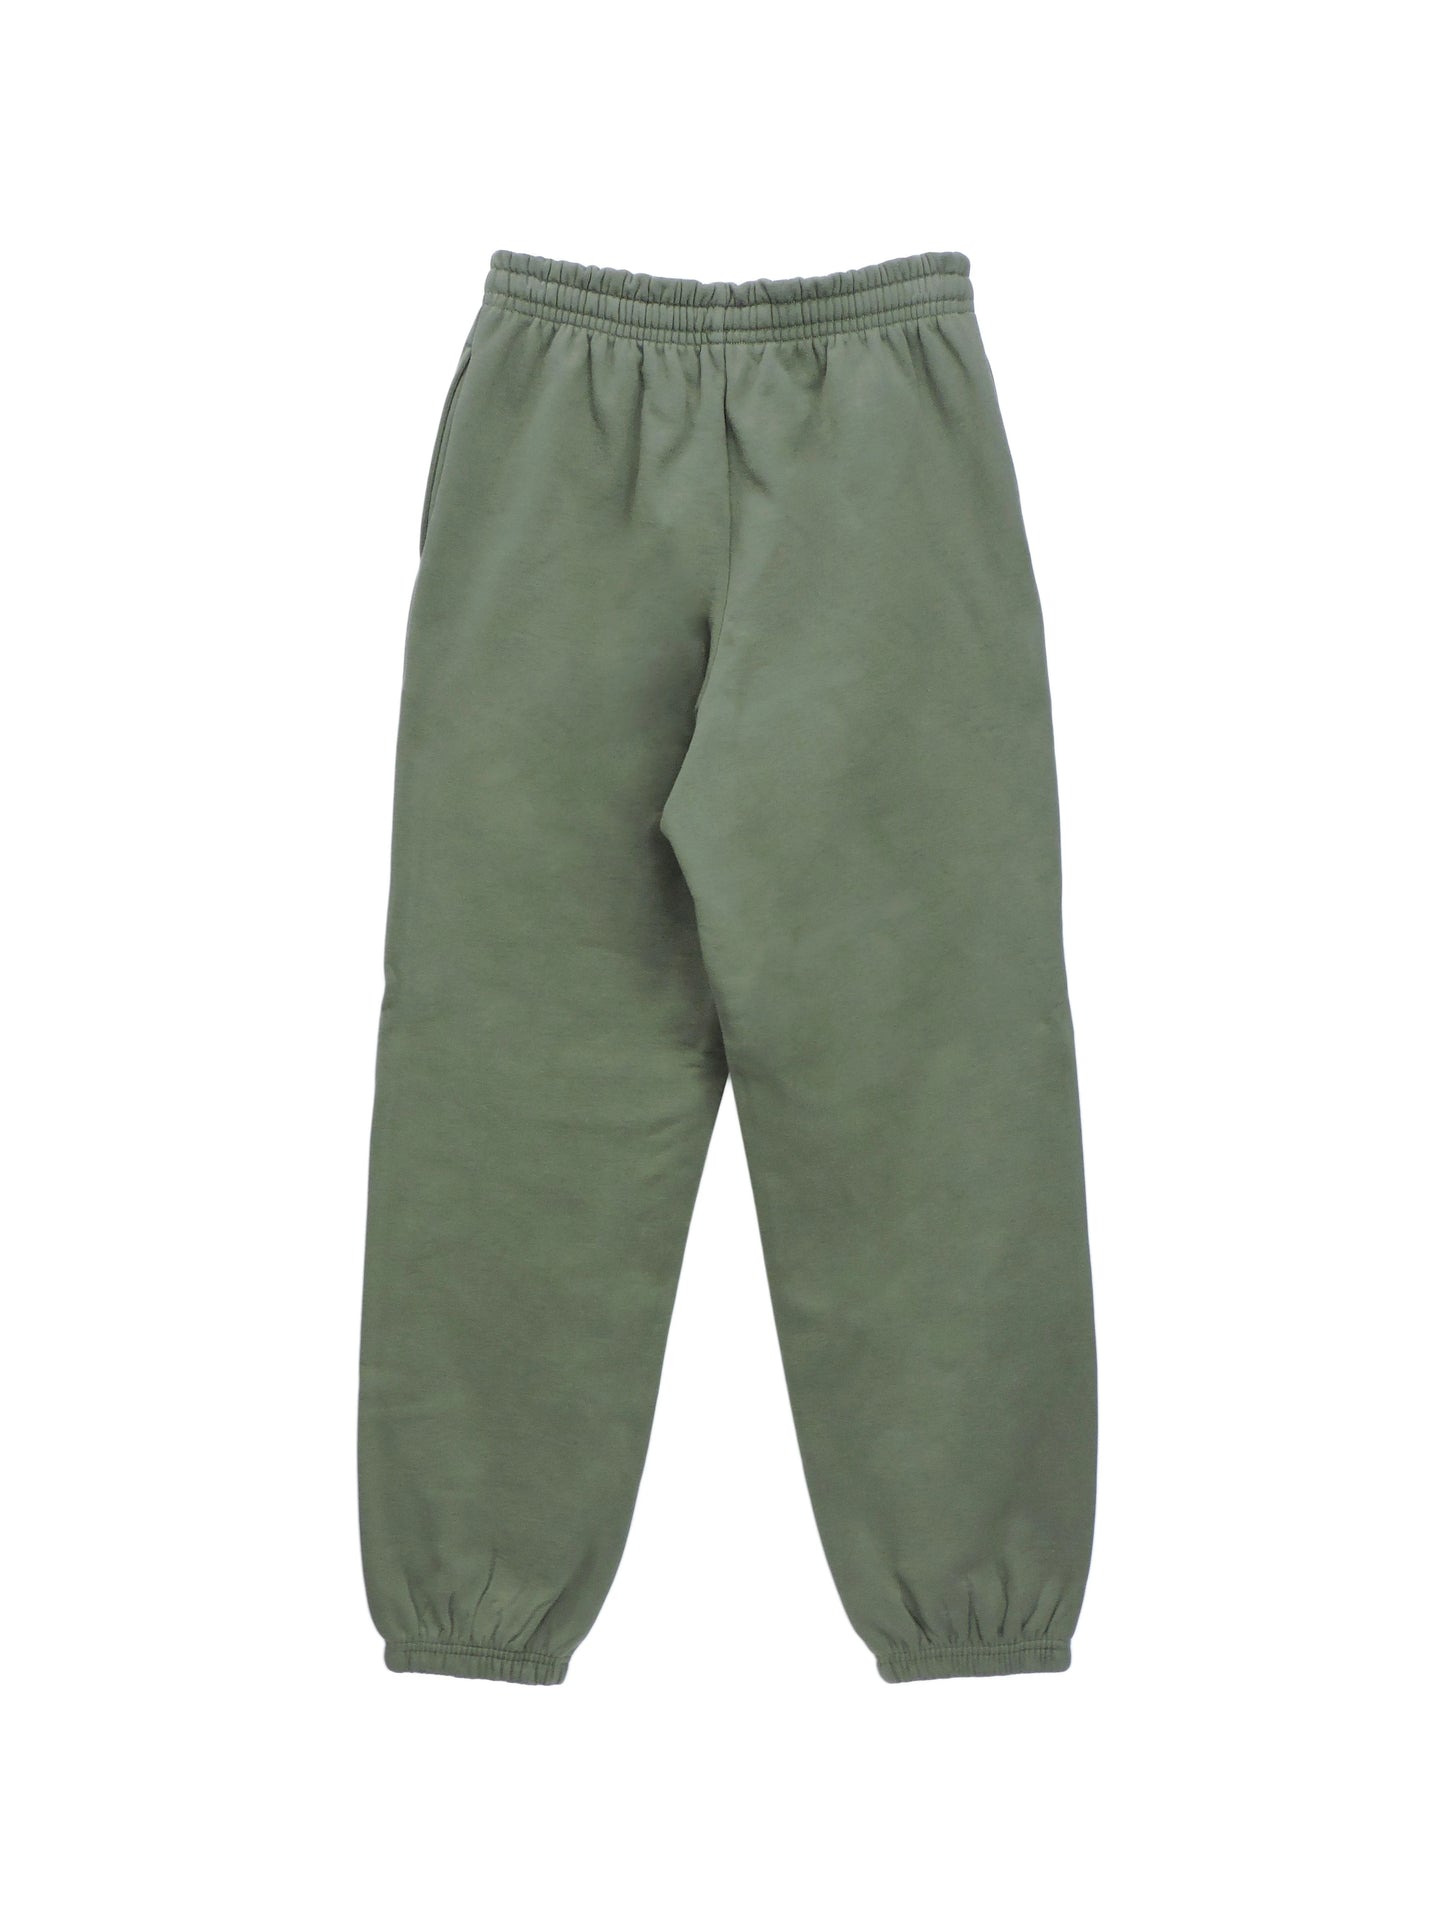 Back of olive green sweatpants with elastic ankle cuffs